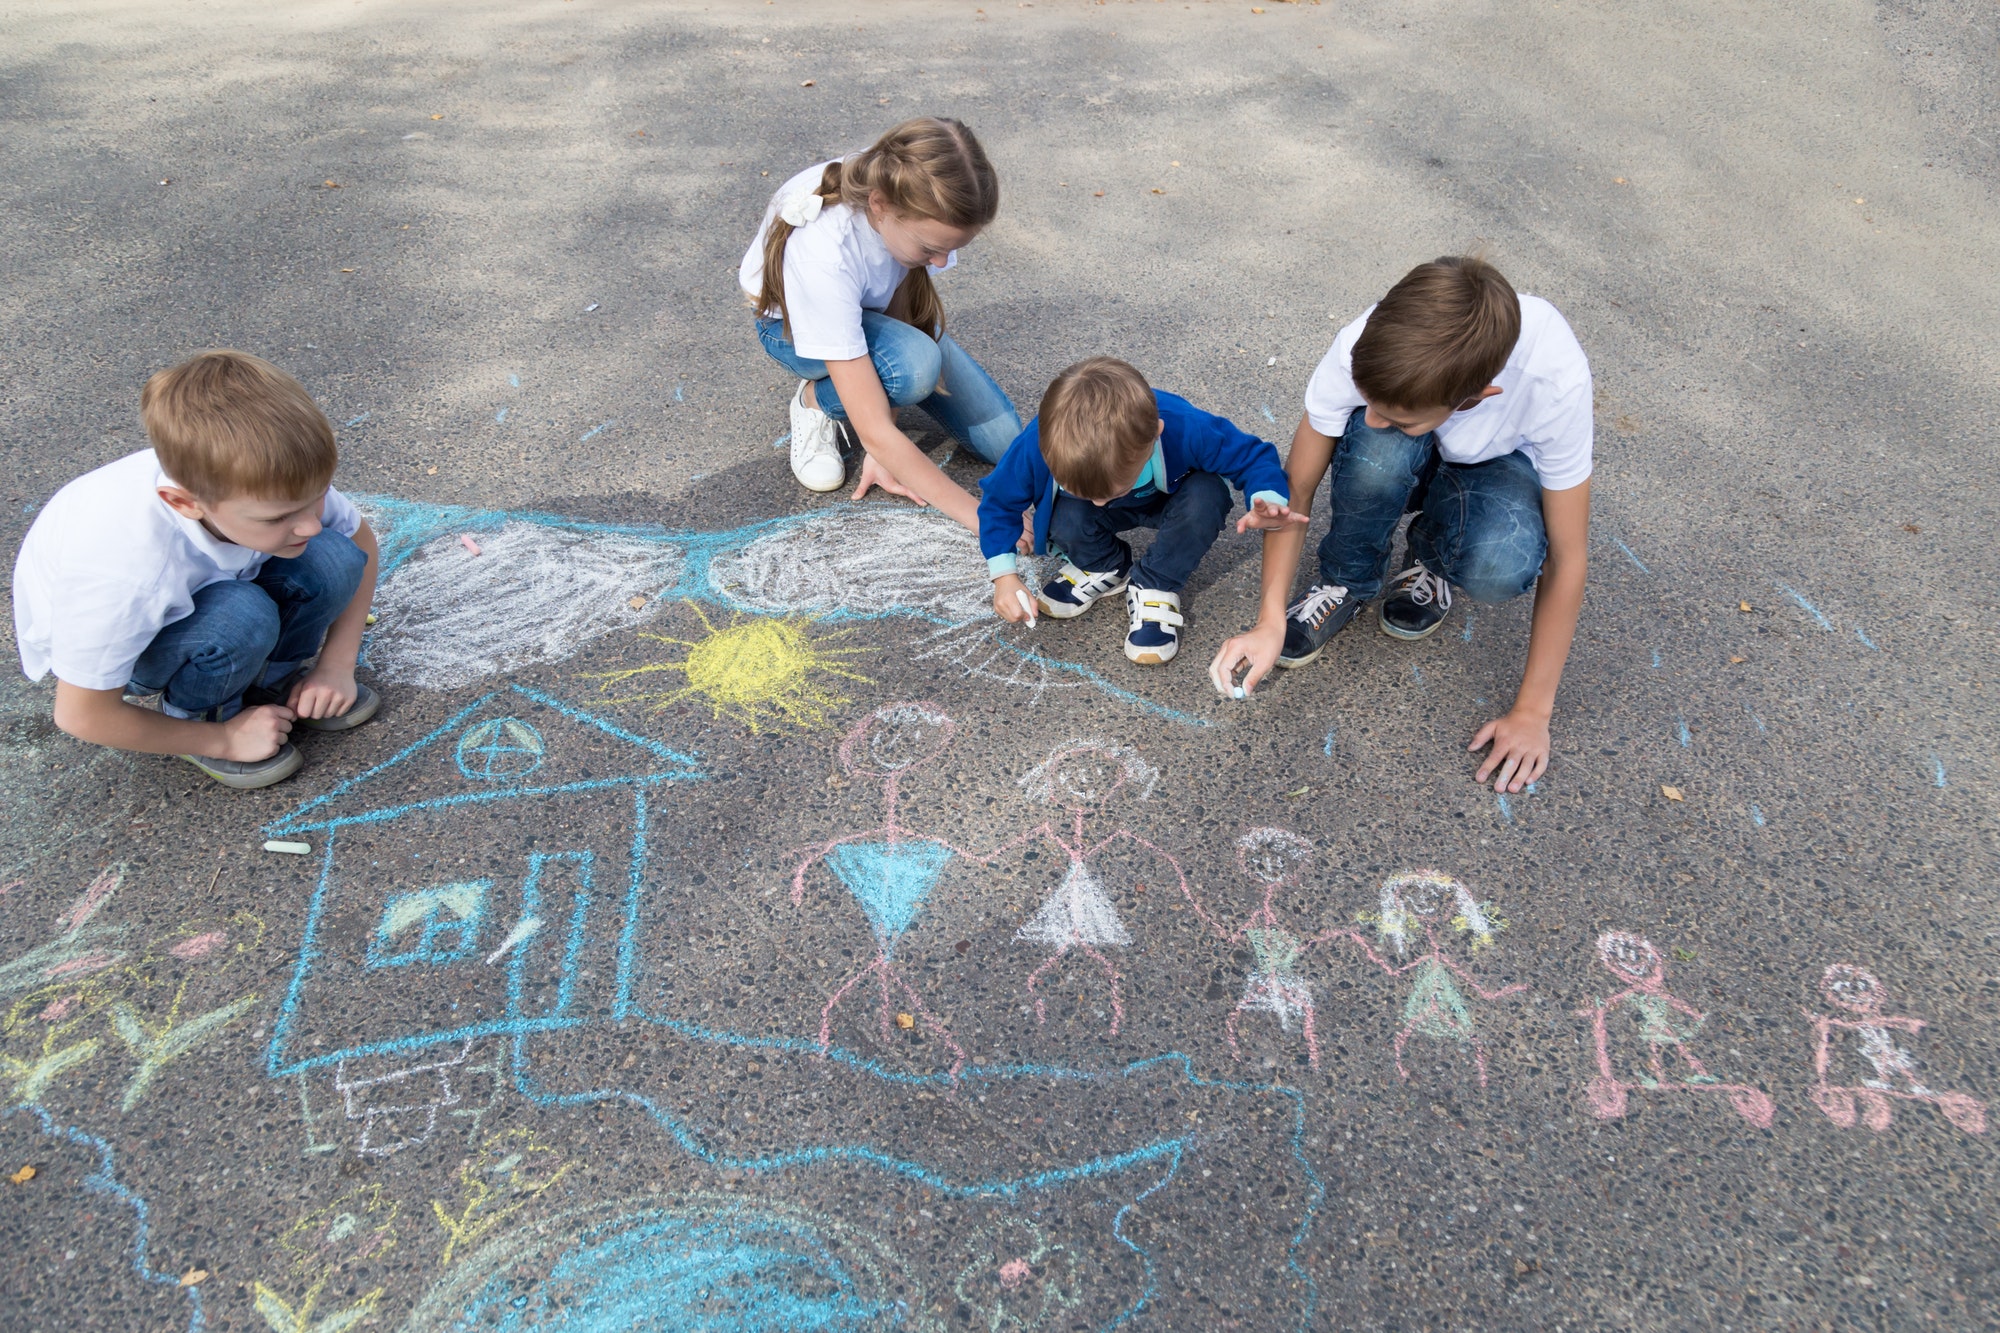 Children draw with crayons on the asphalt